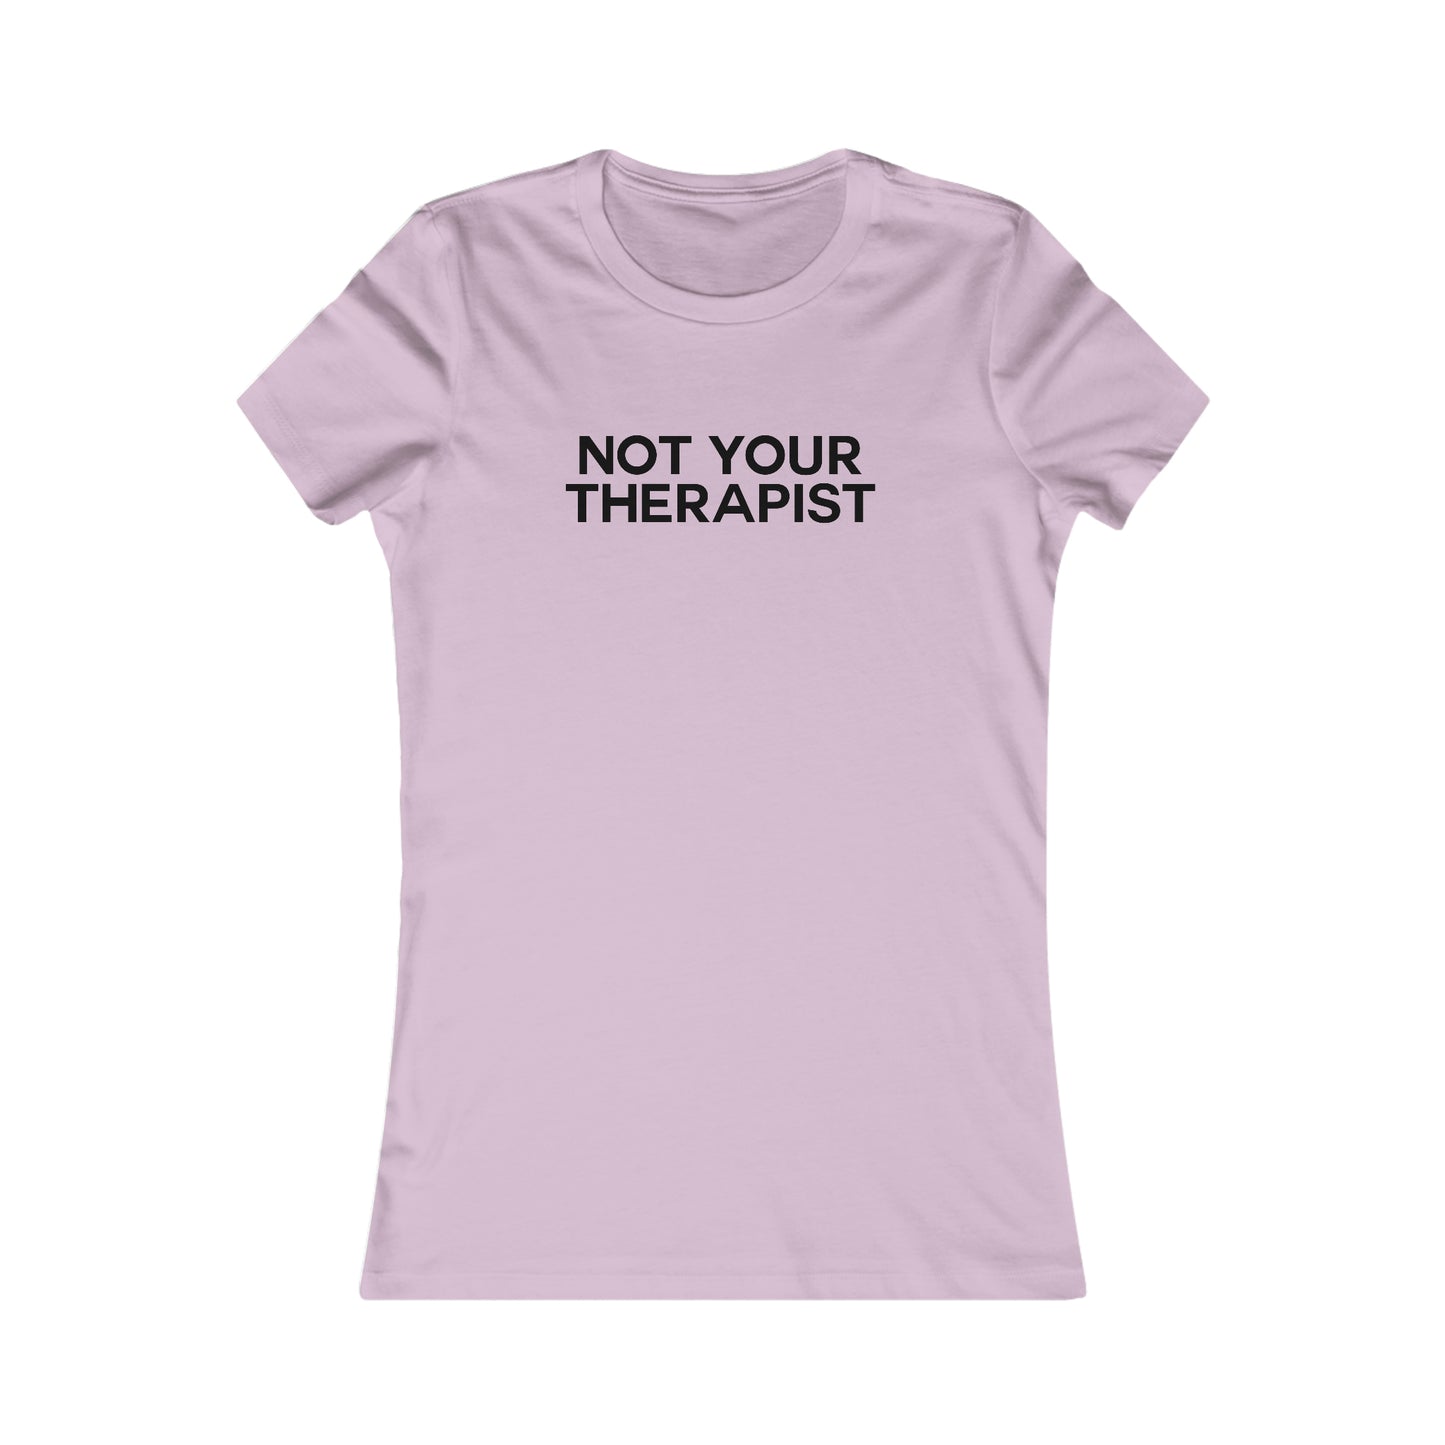 Not Your Therapist Tee